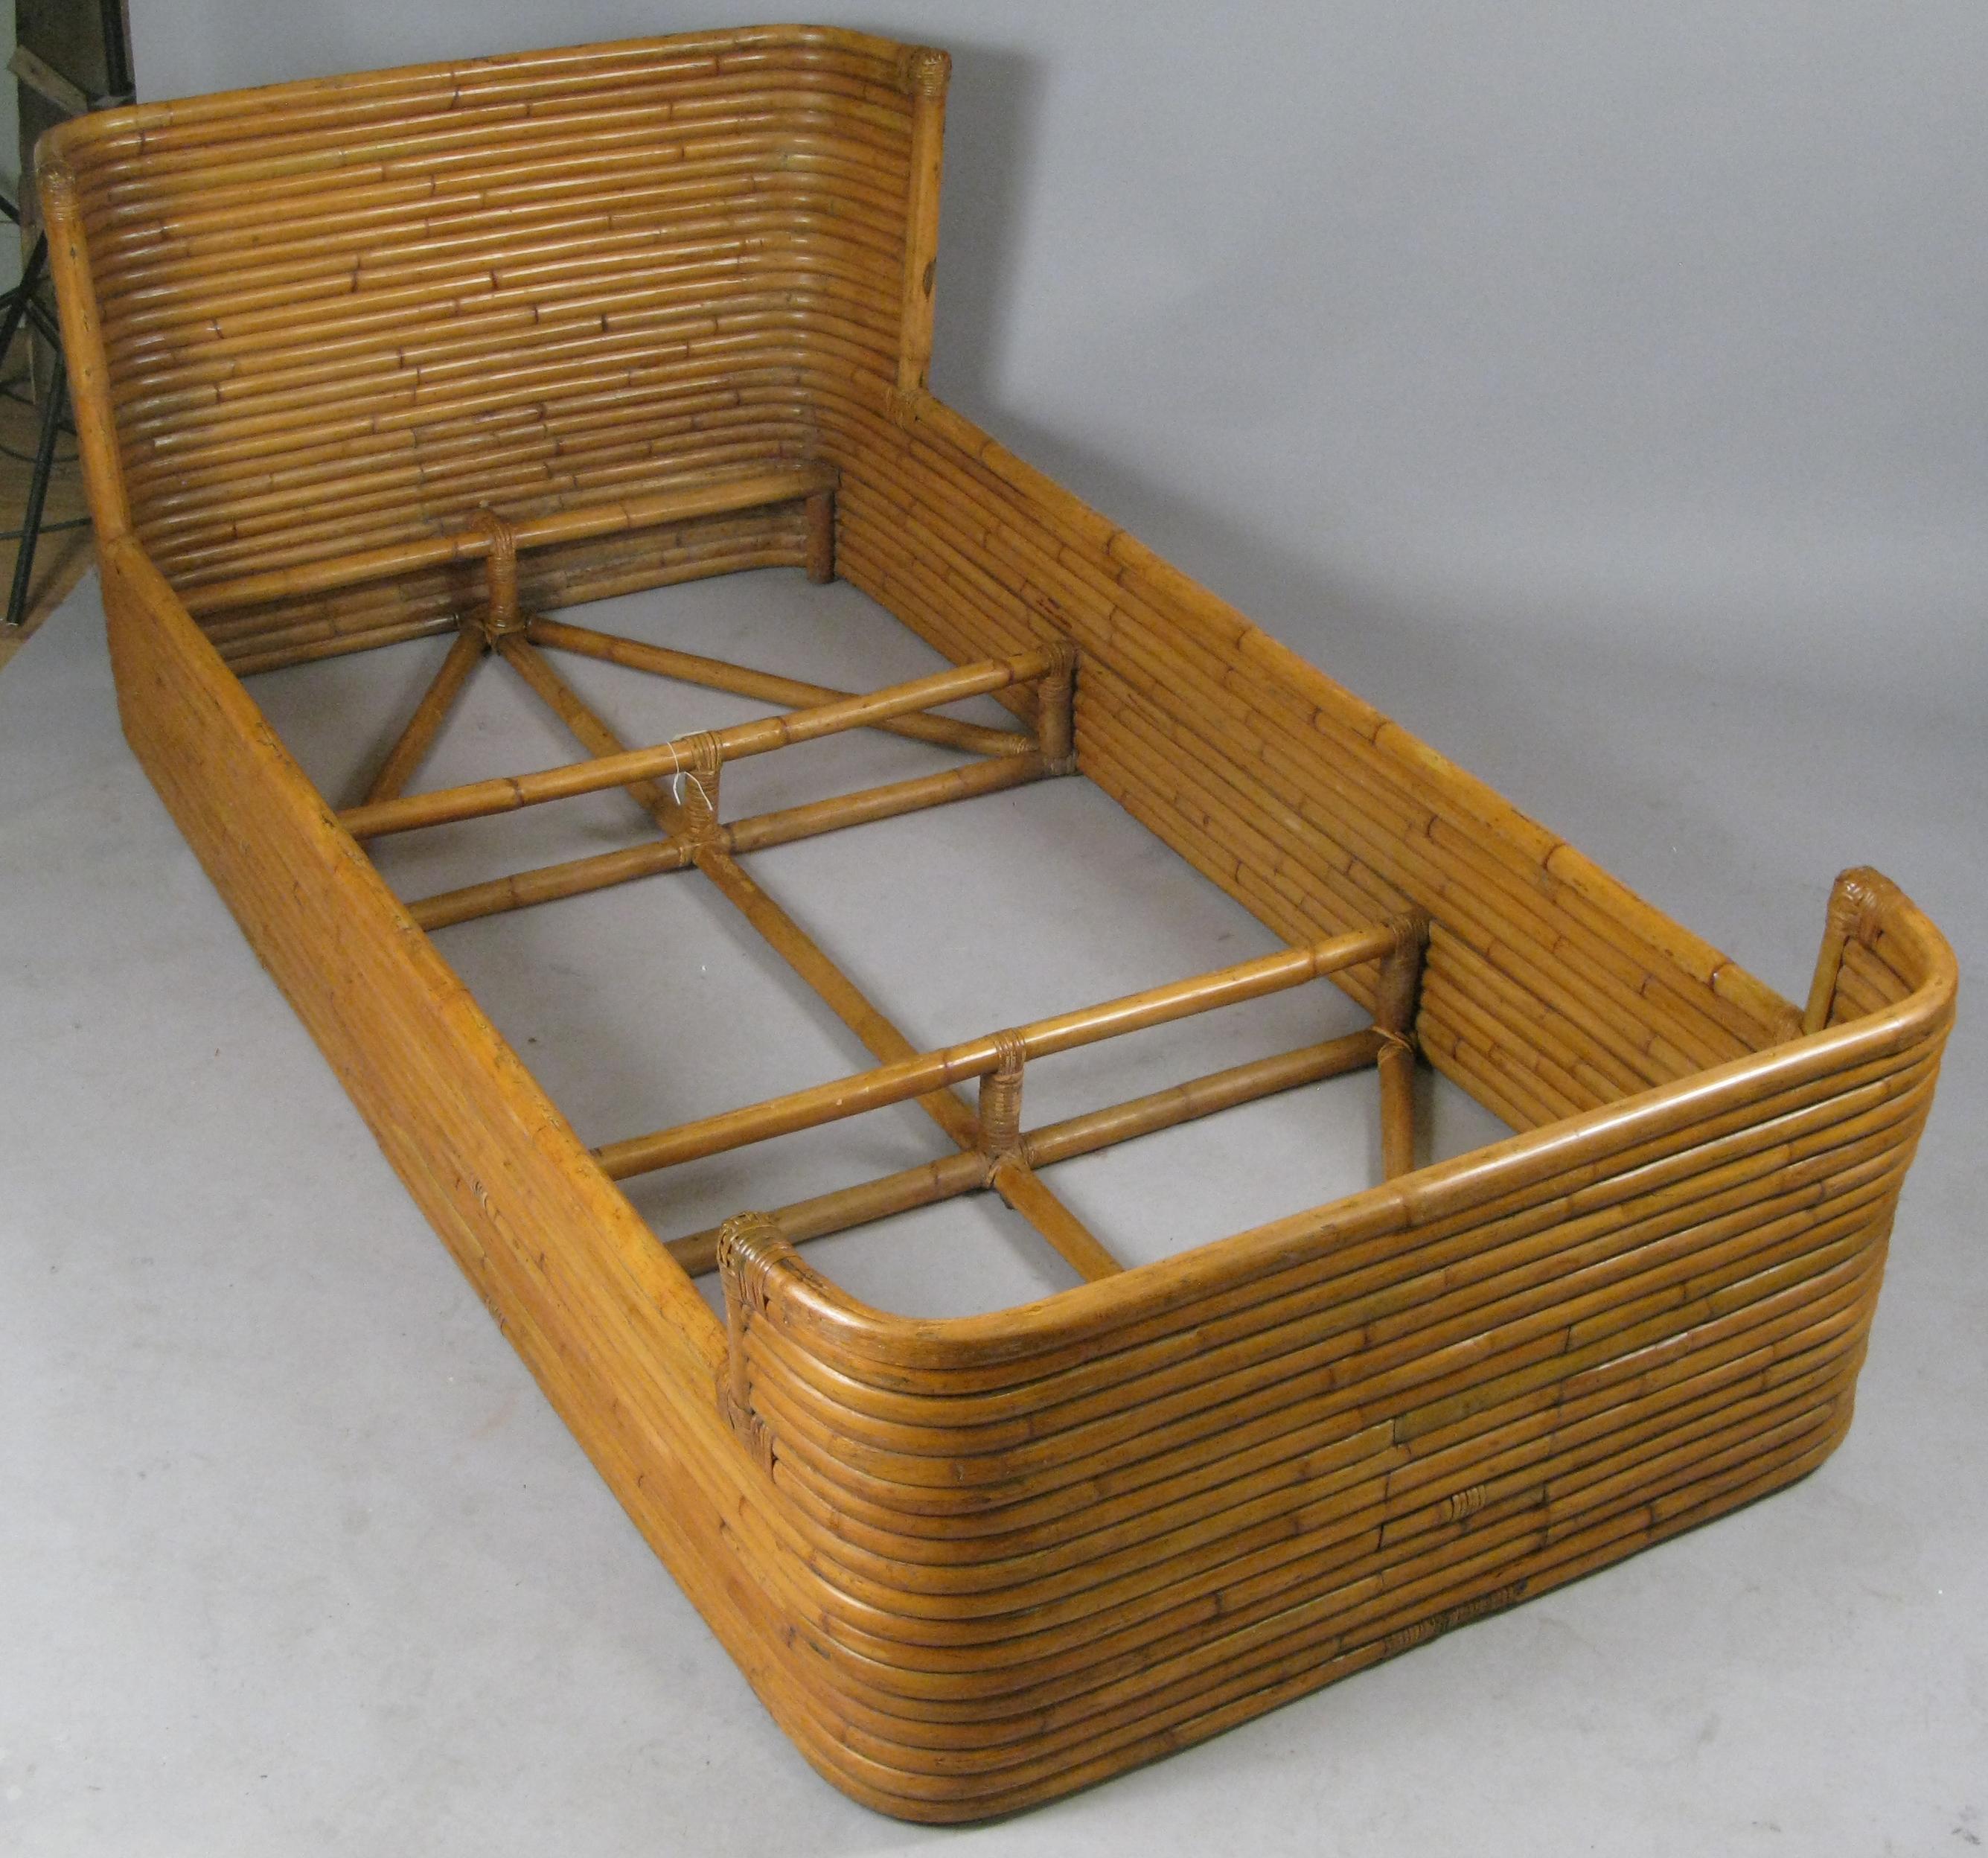 American Rattan 1940s Bed with Curved Corners